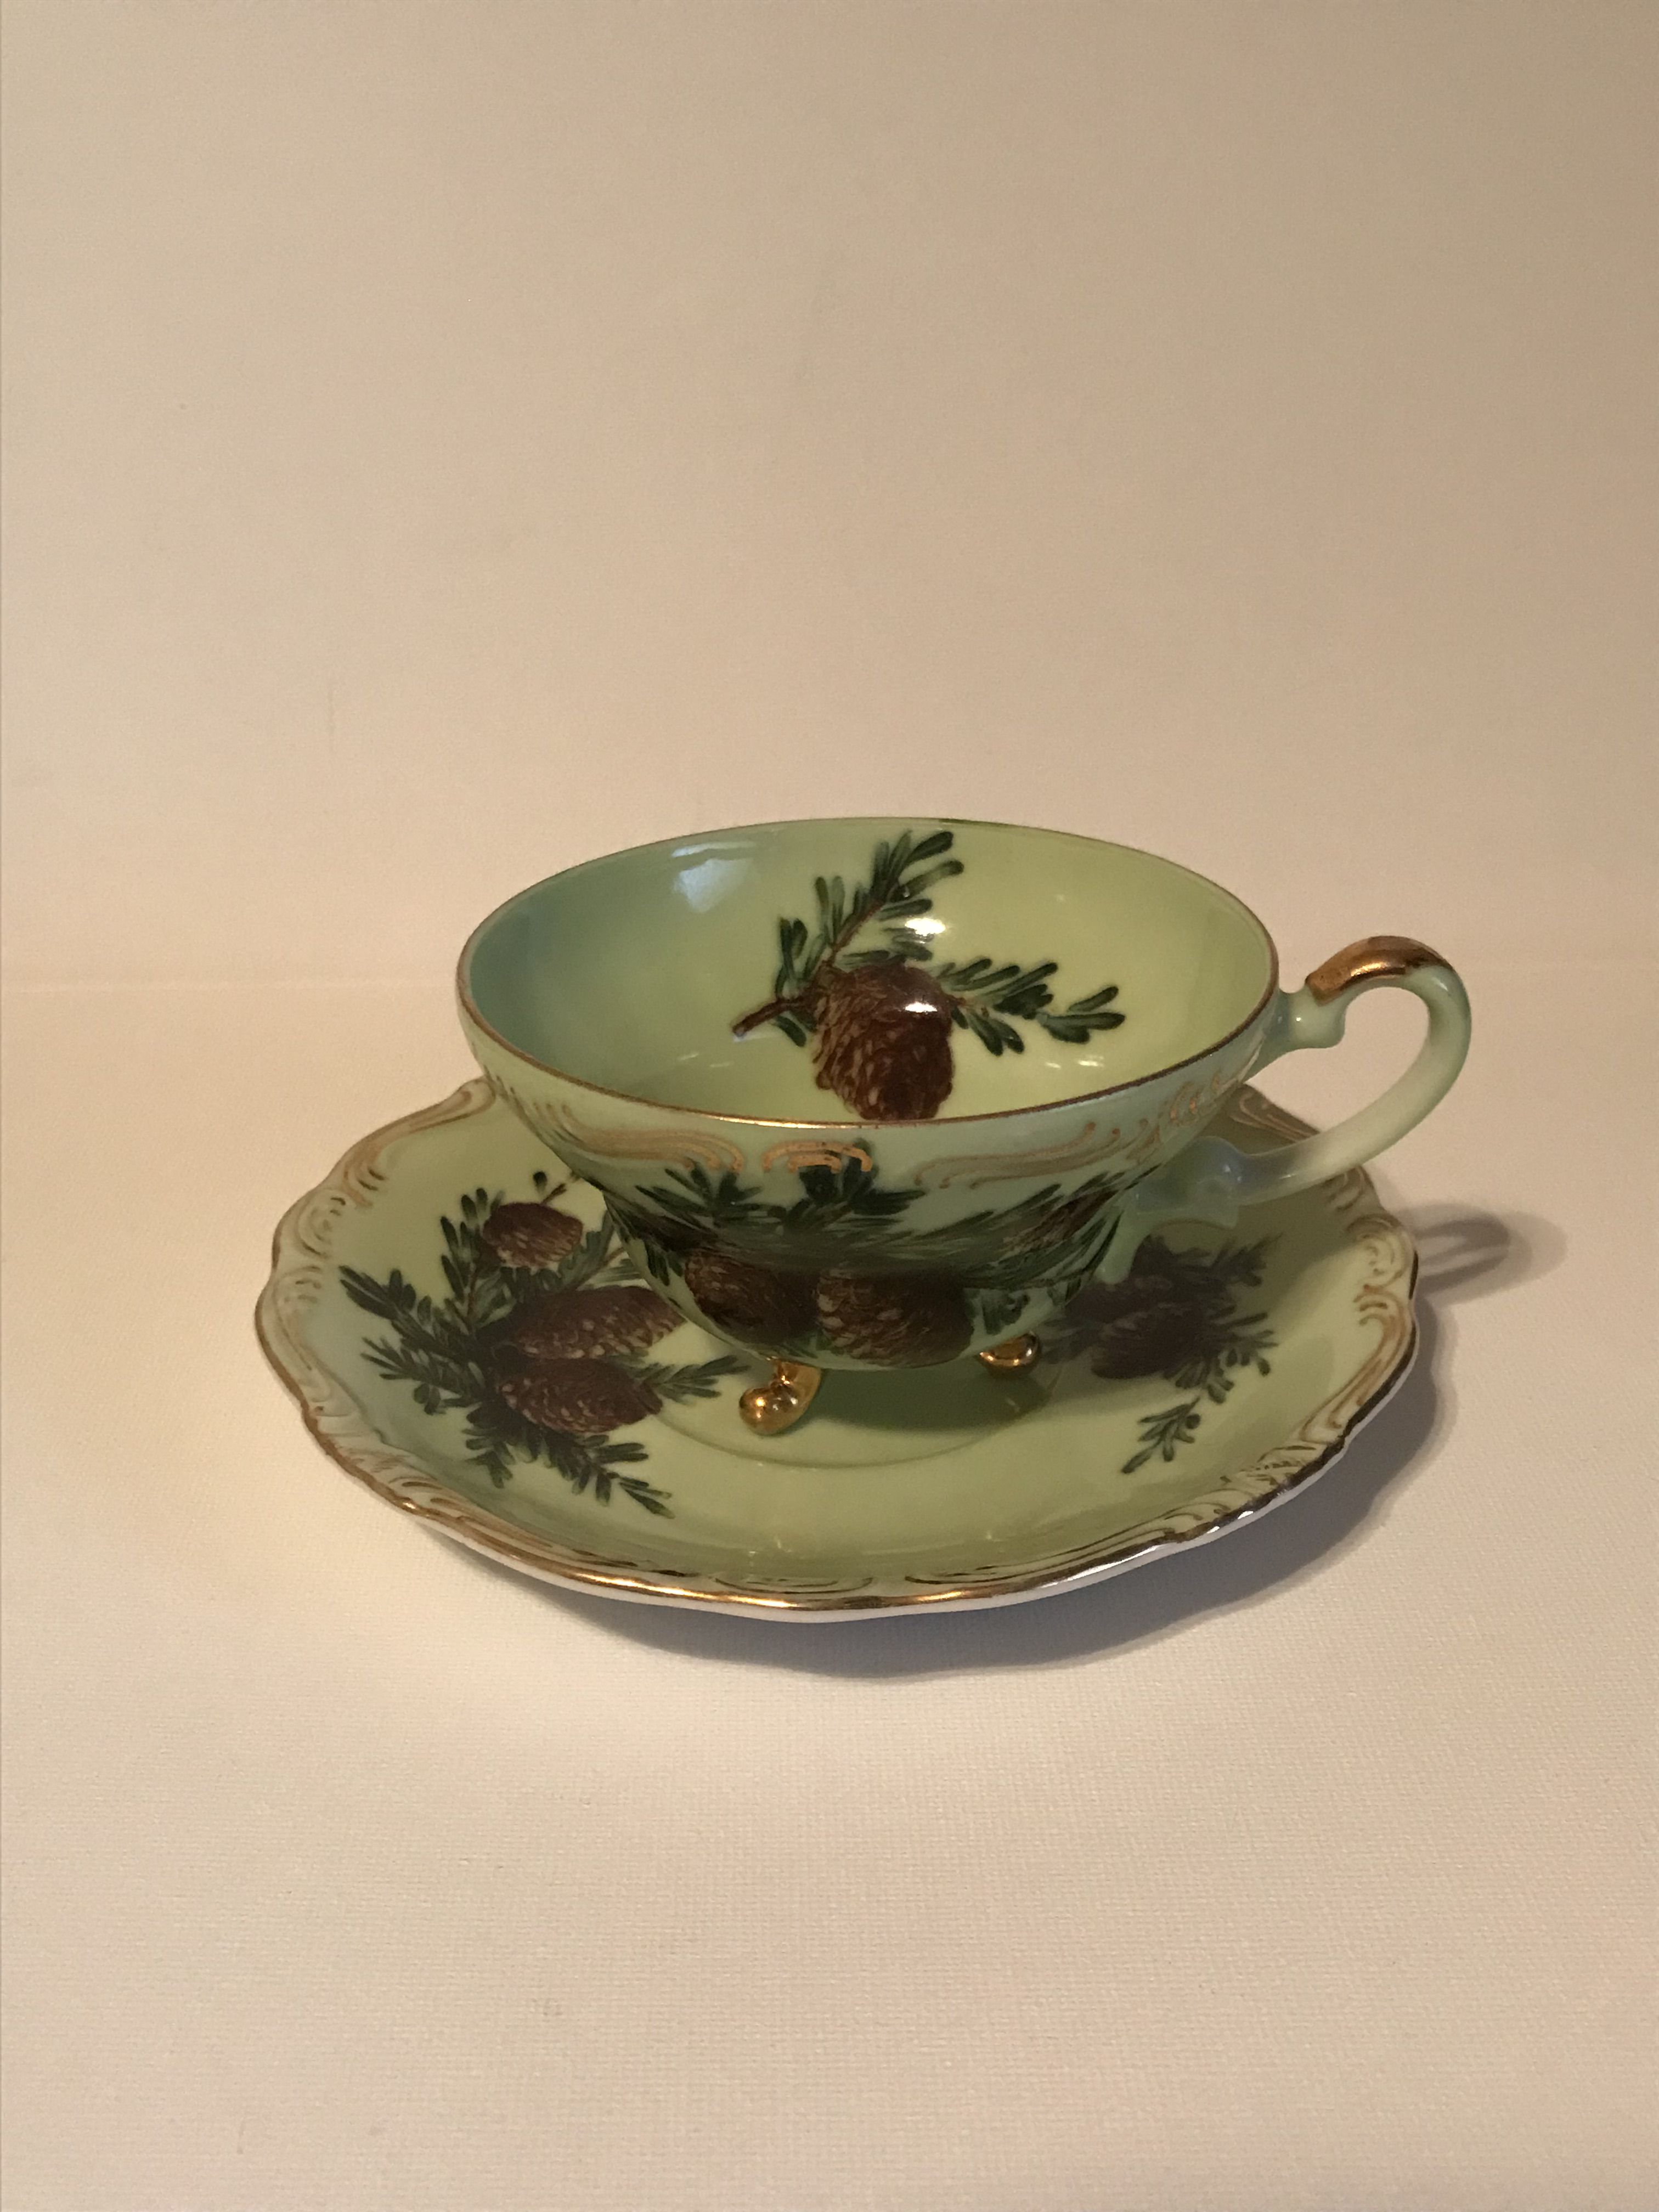 Antique China Tea Cup & Saucer With Pine Cones #6 / 790